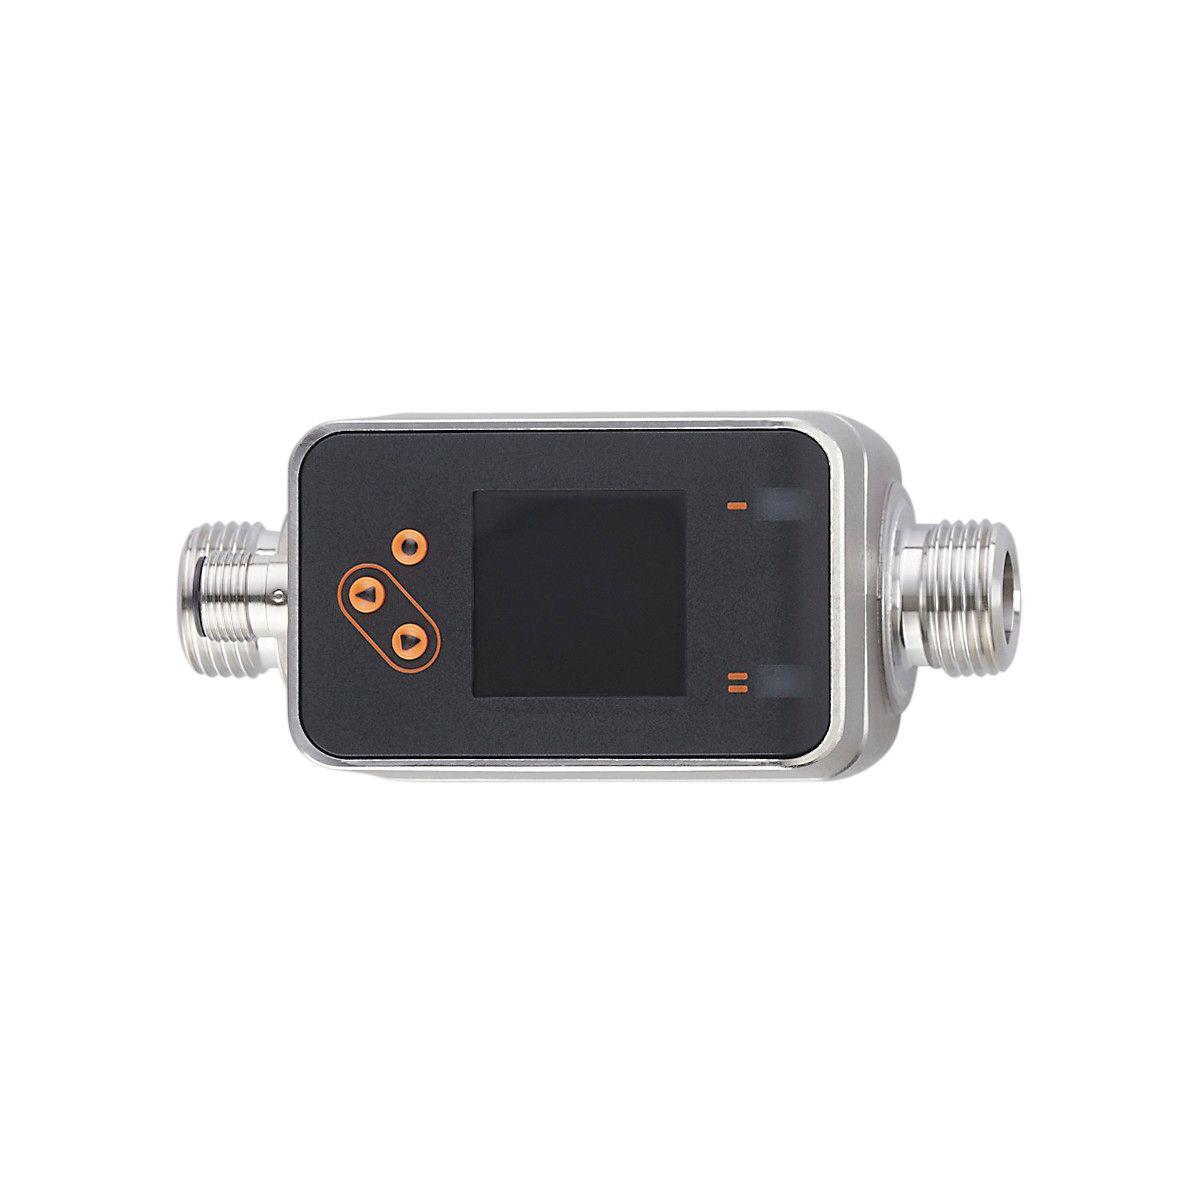 ifm Electronic SM6020 Magnetic-inductive flow meter, Precise measurement of flow, consumption and medium temperature, Number of inputs and outputs: Number of digital outputs: 2; Number of analog outputs: 1, Measuring range: 0.05...35 l/min 0.003...2.1 m³/h 0.6...555 gph 0.01..